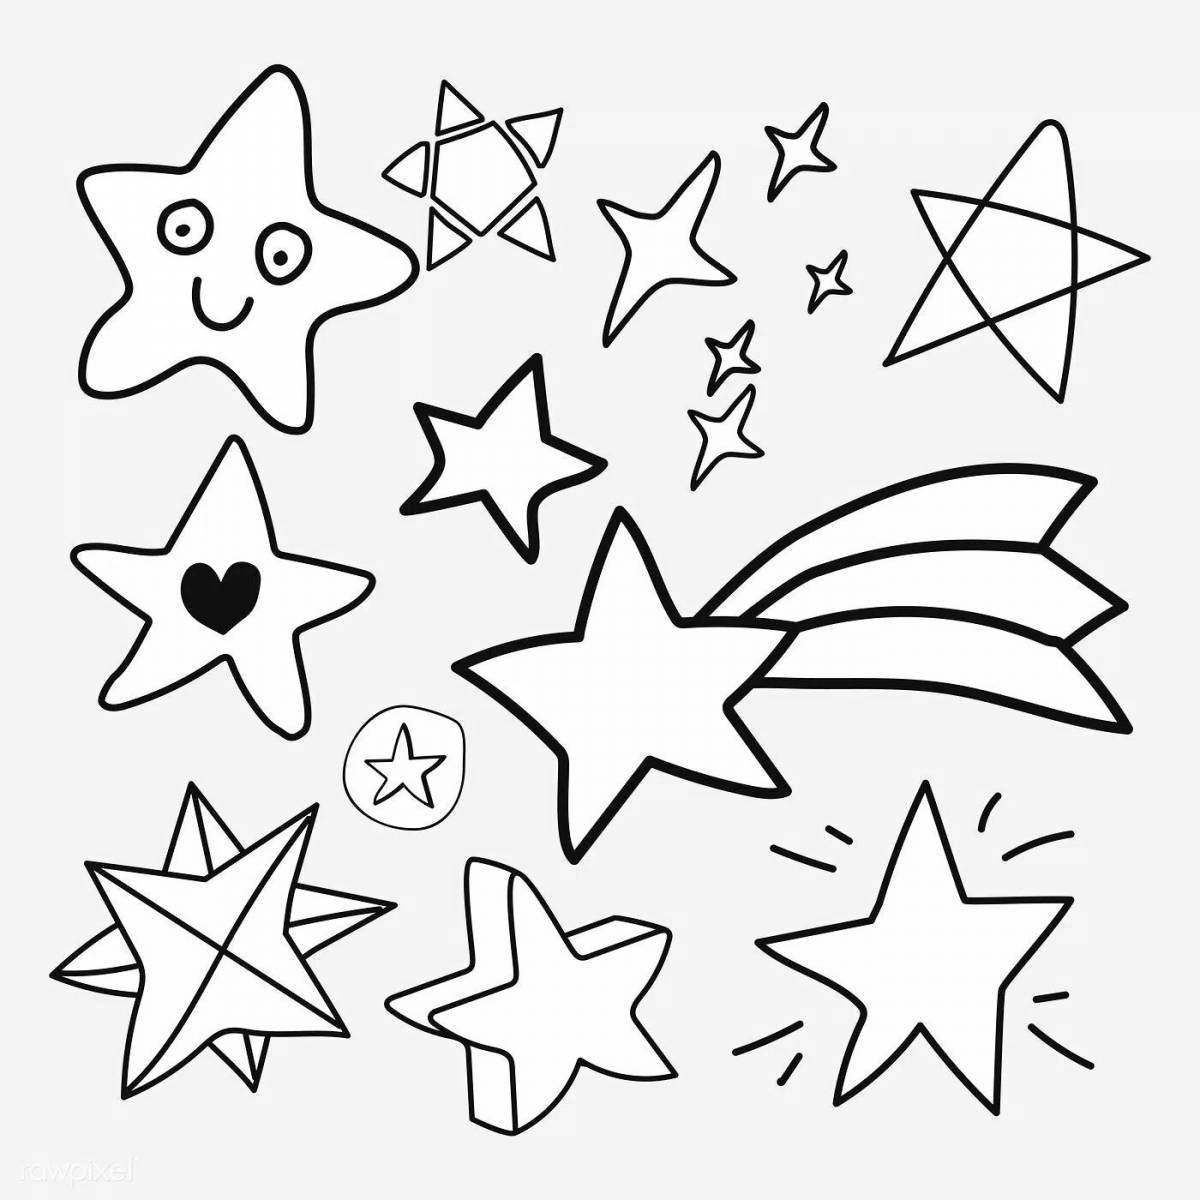 Colourful star coloring book for kids 3-4 years old